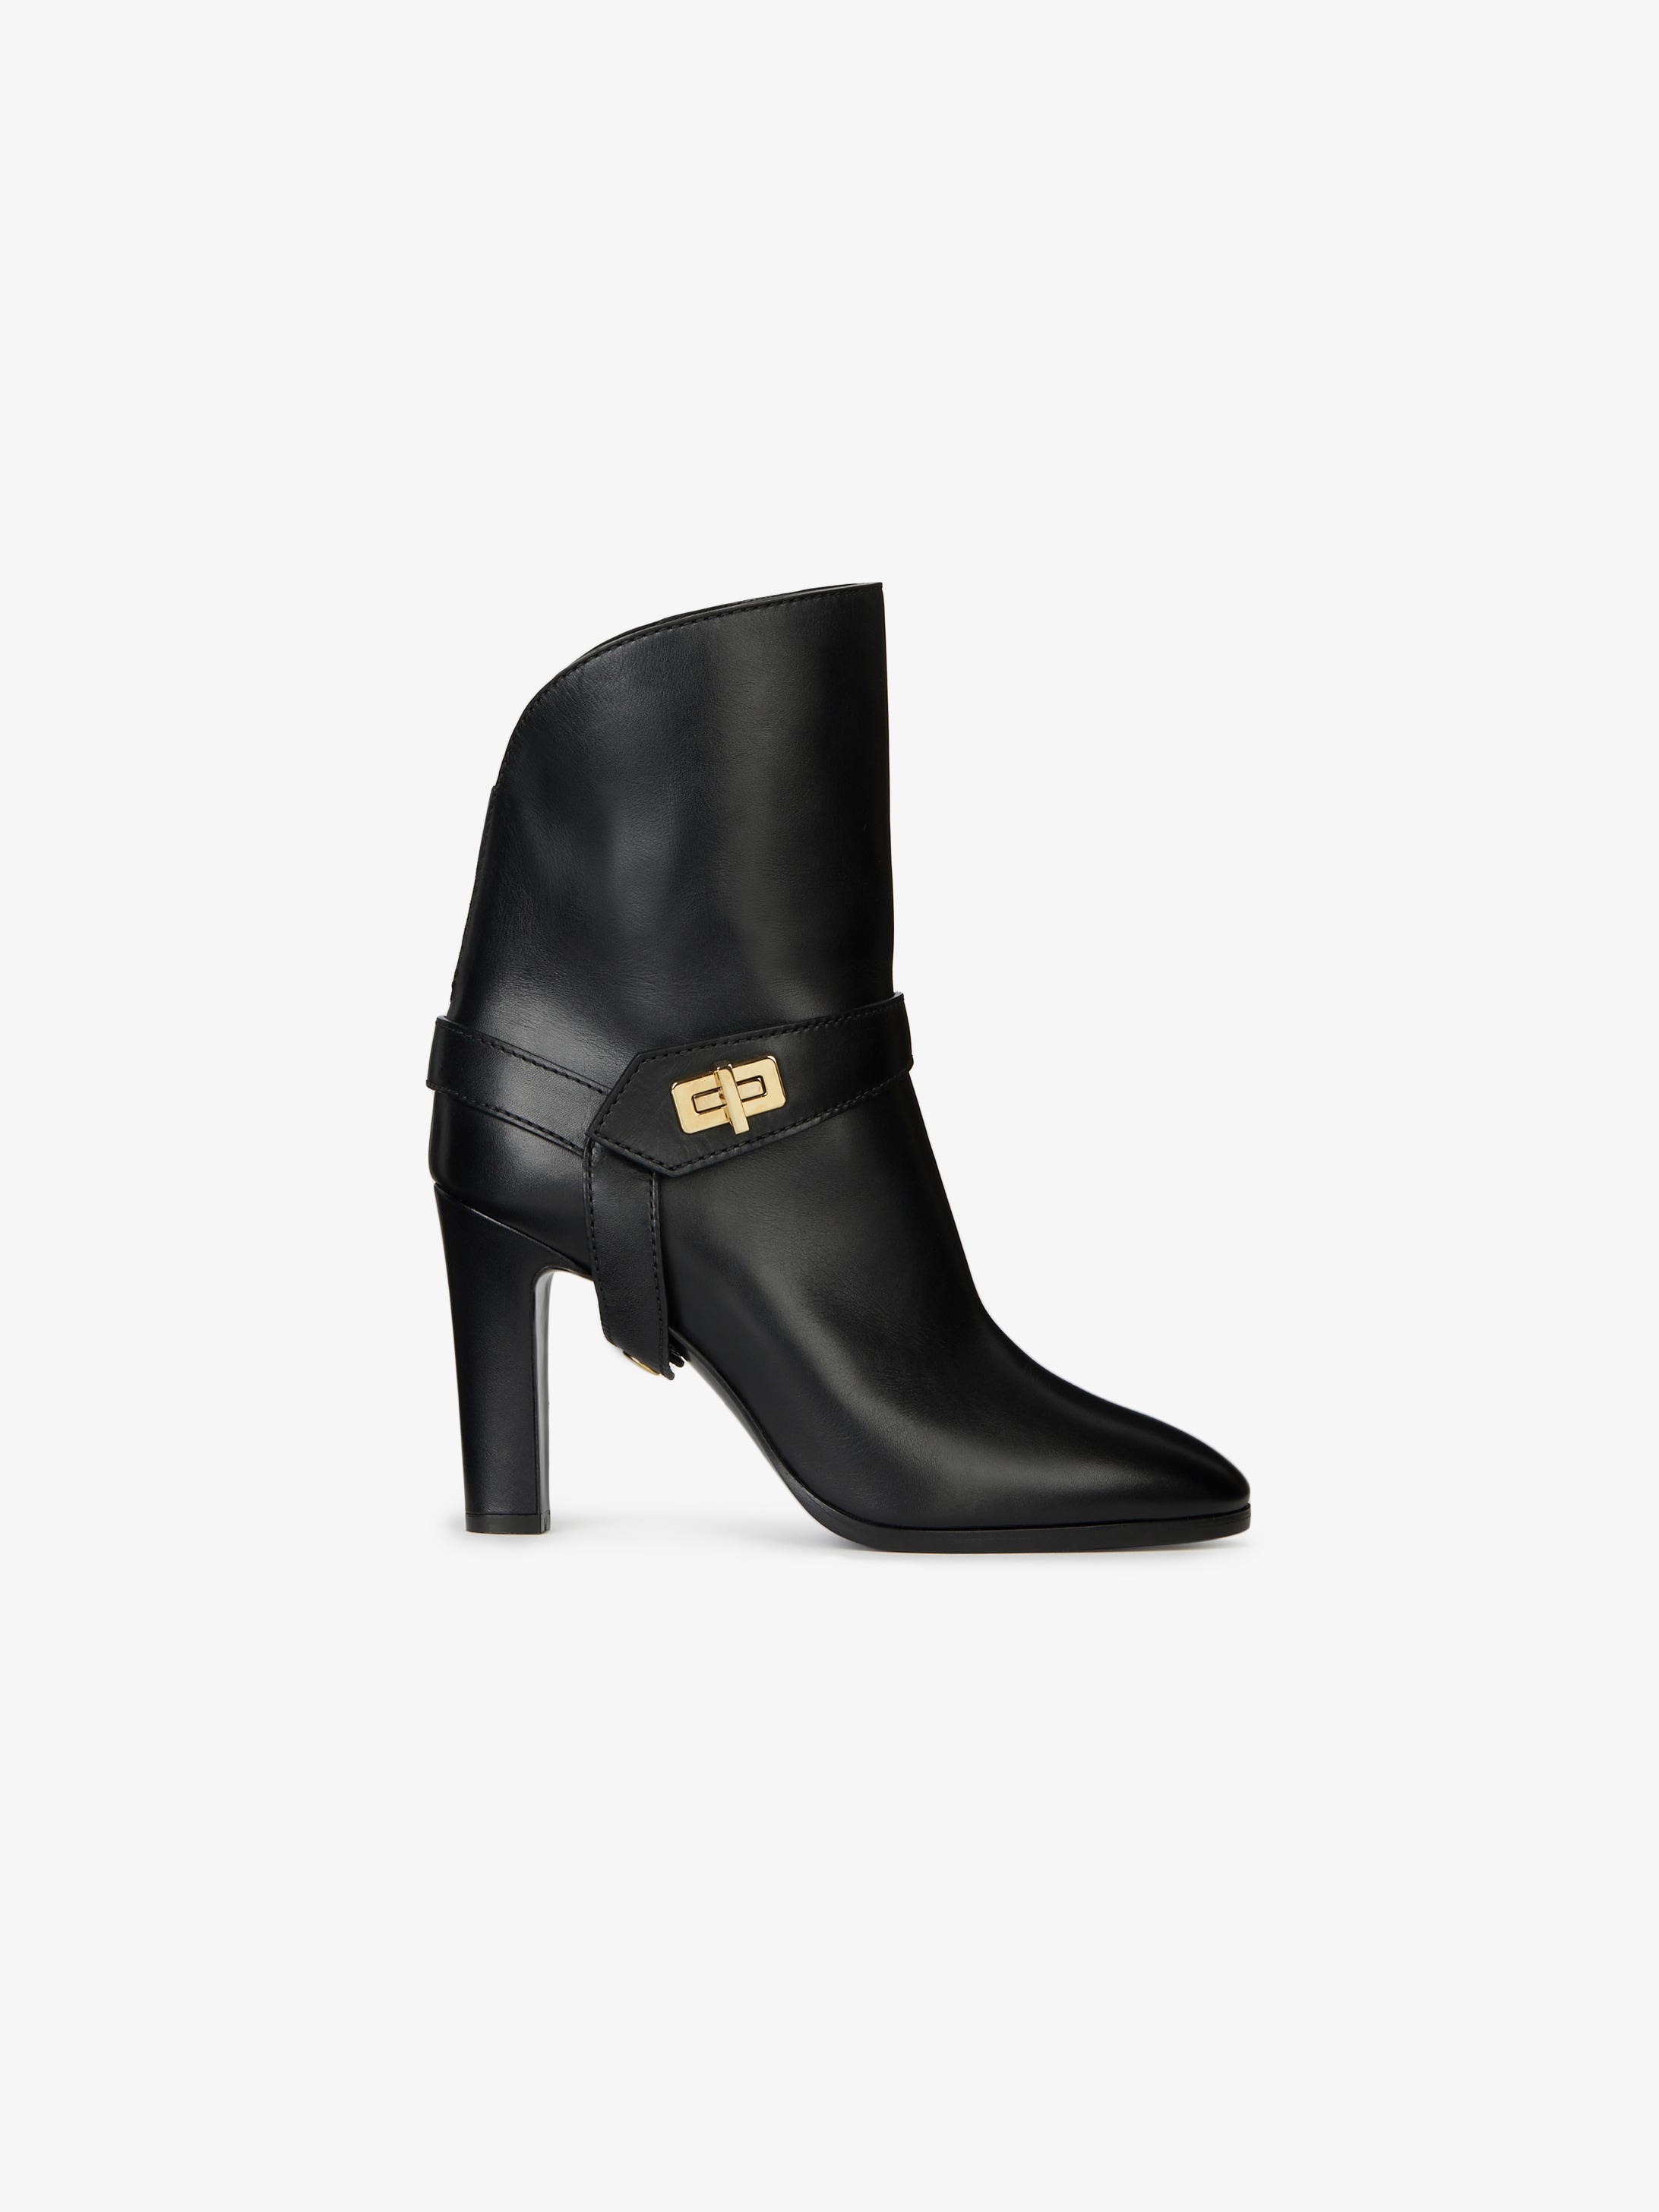 givenchy boots sizing